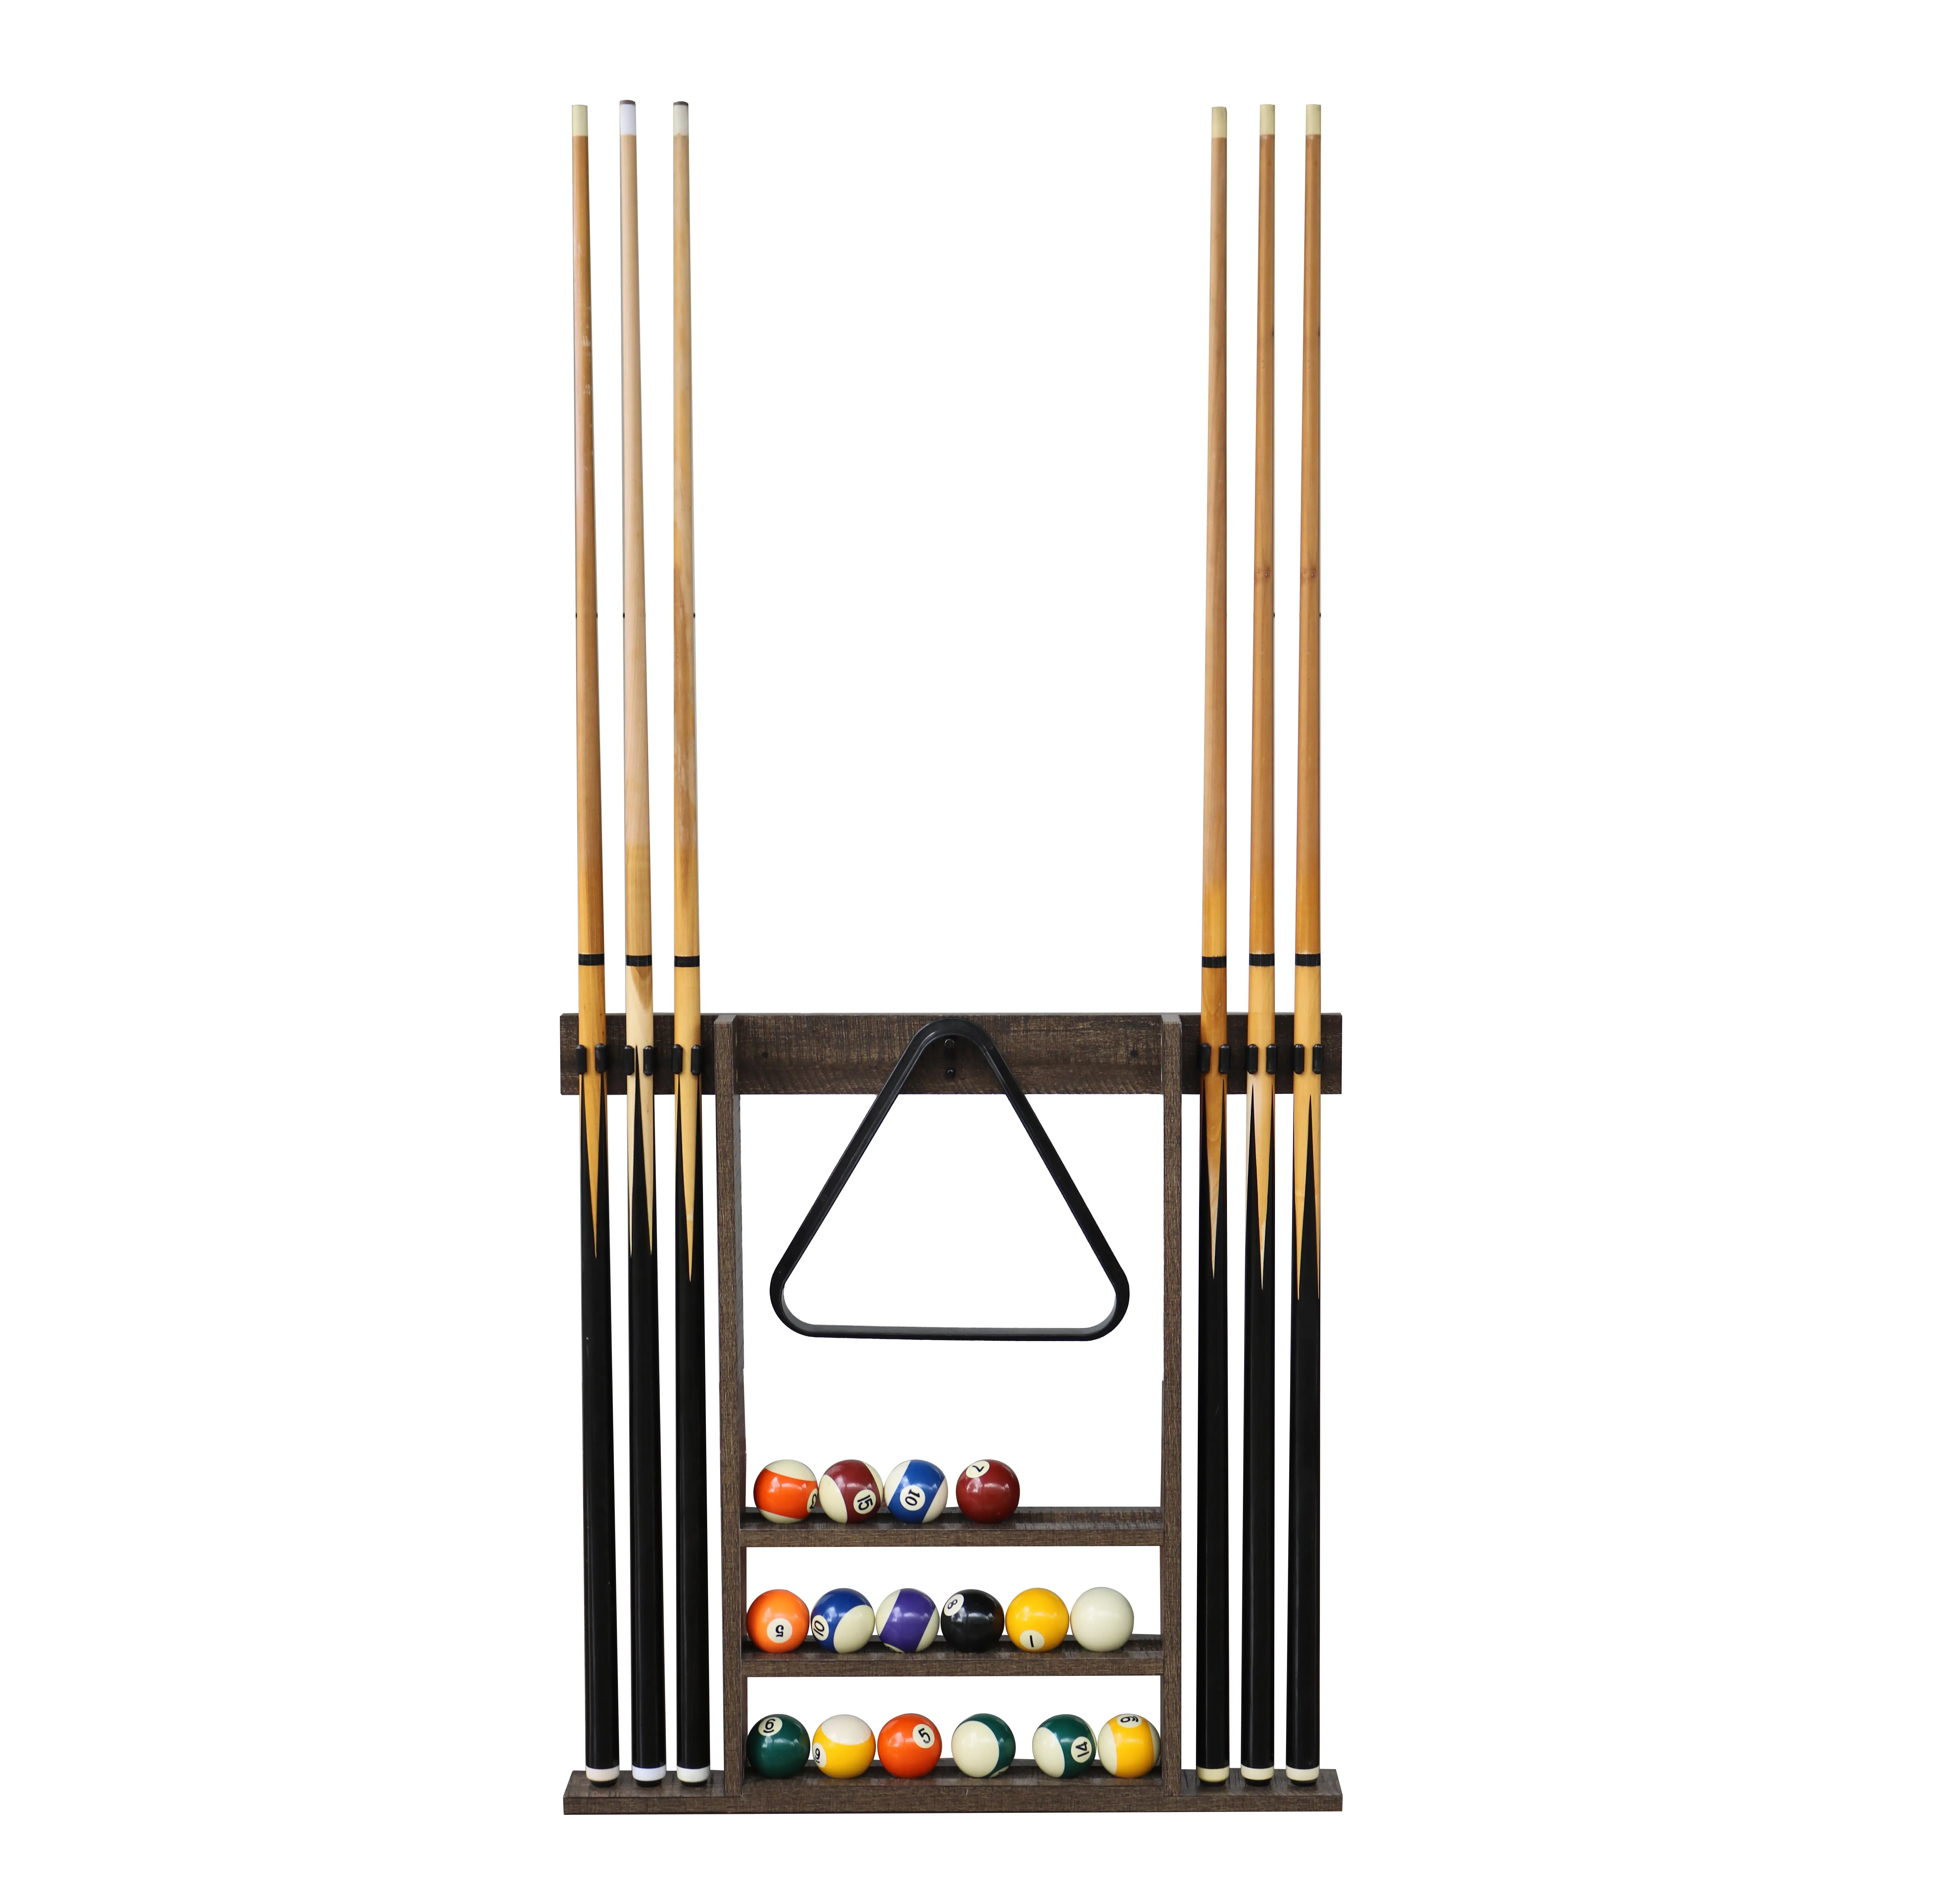 Cue Rack China Trade,Buy China Direct From Cue Rack Factories at 